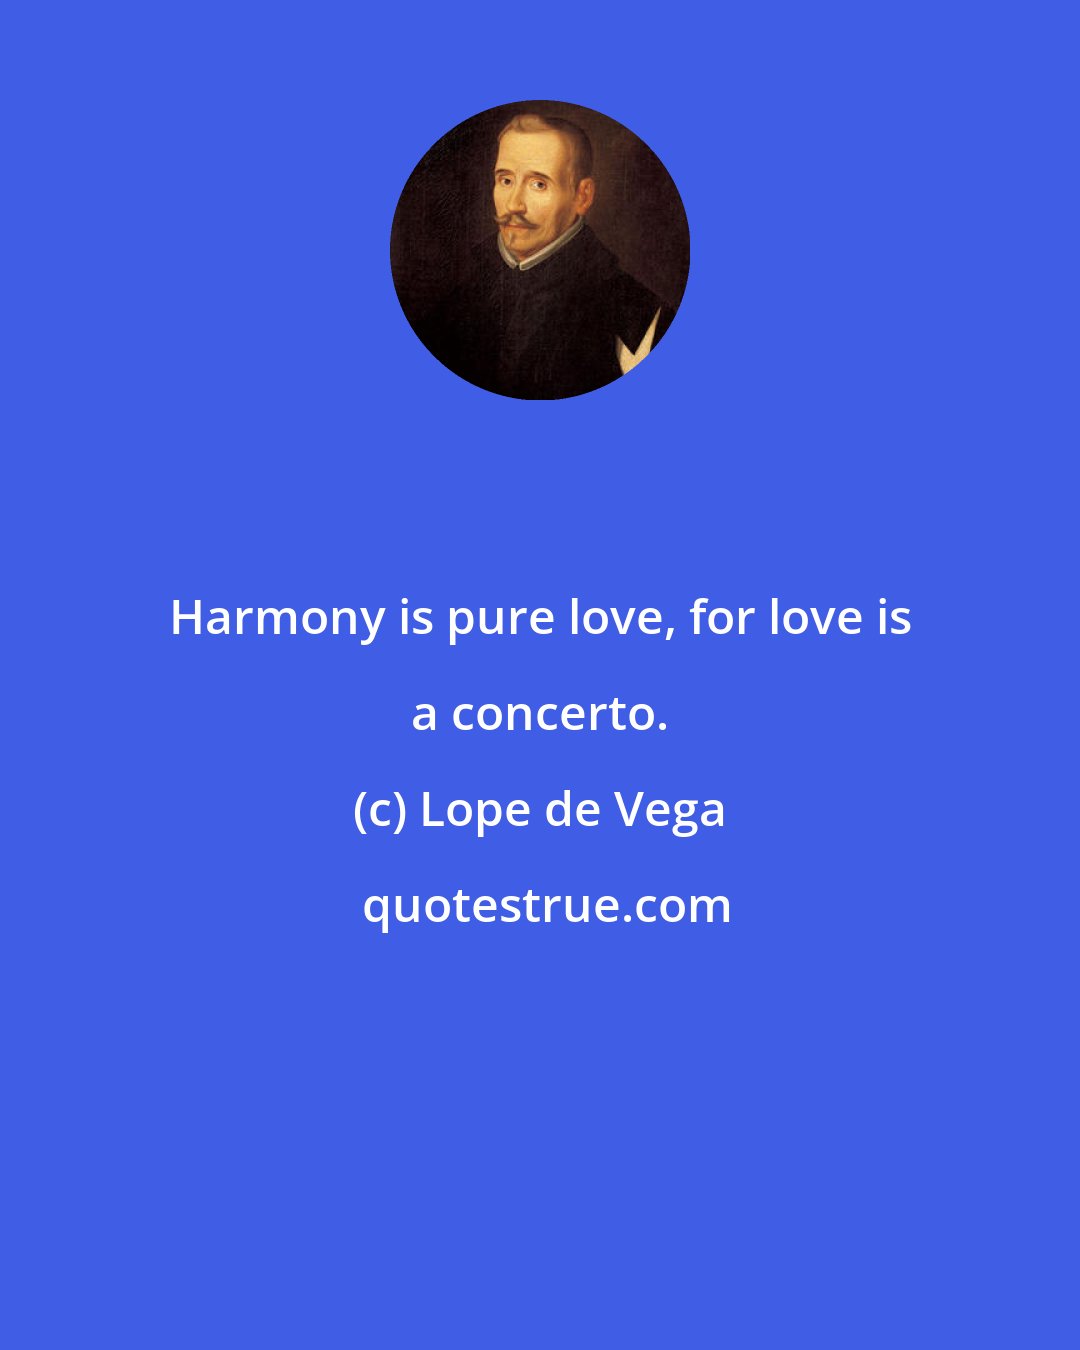 Lope de Vega: Harmony is pure love, for love is a concerto.